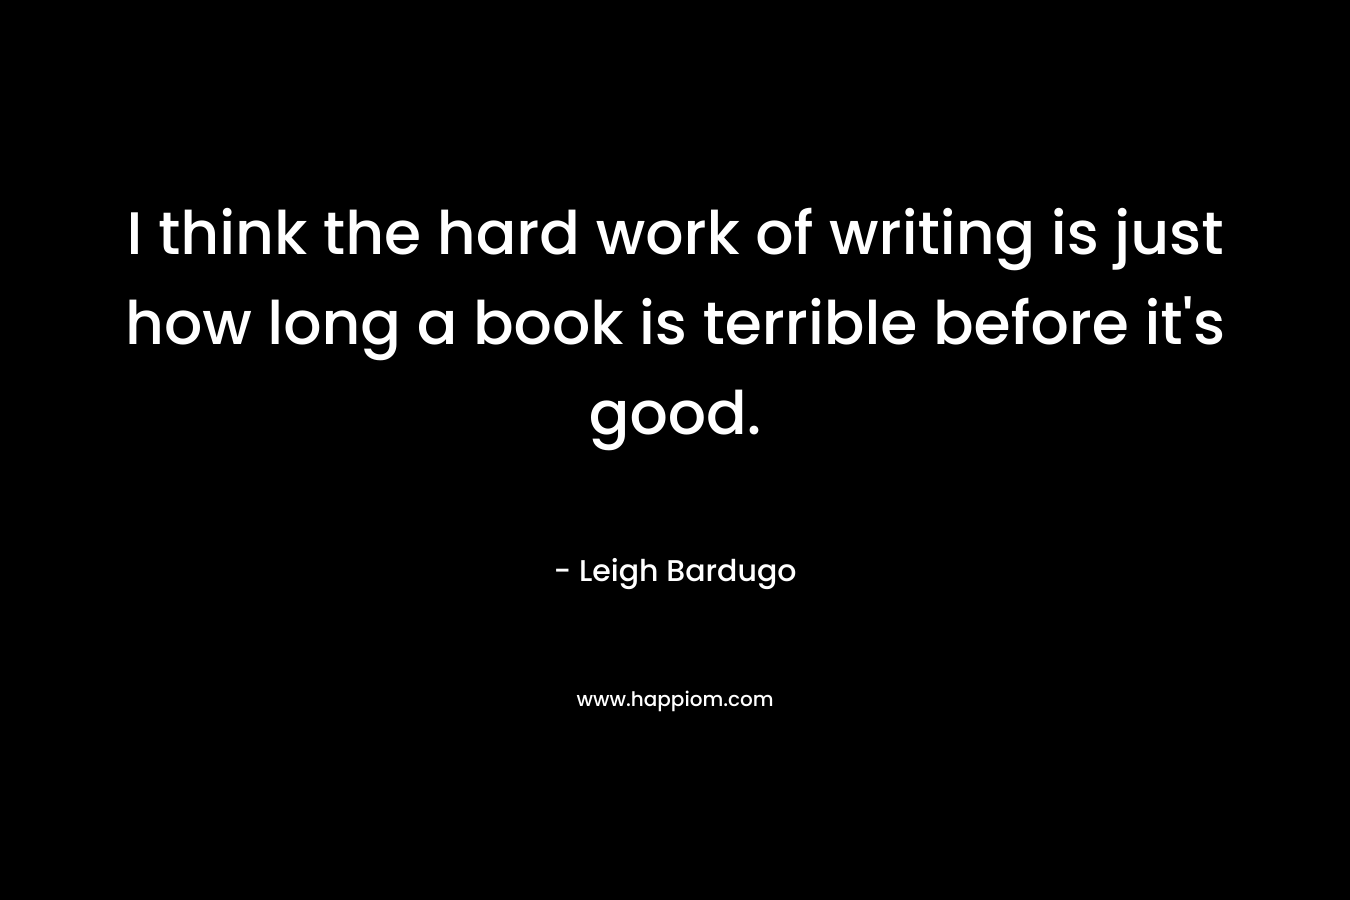 I think the hard work of writing is just how long a book is terrible before it's good.